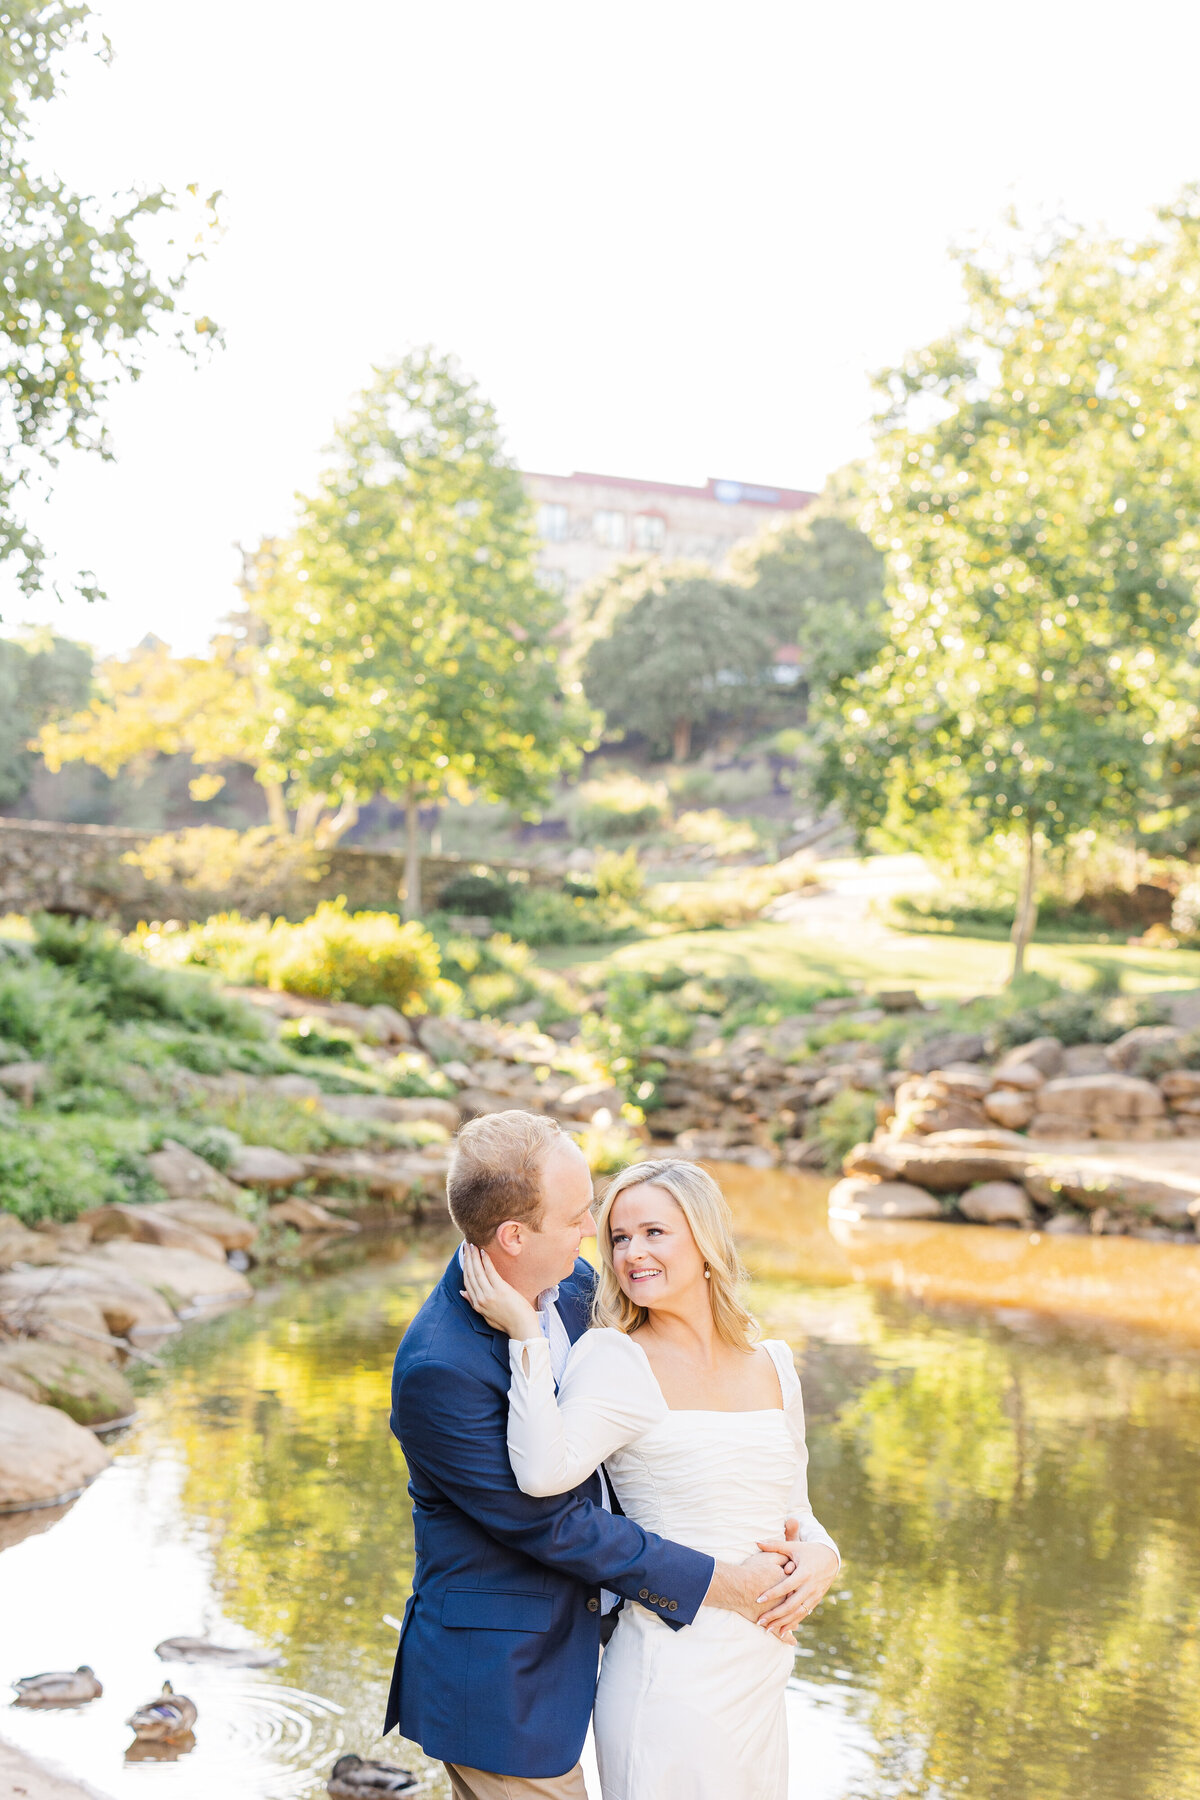 Lauren___Herb_Downtown_Greenville_Engagement_Session-53